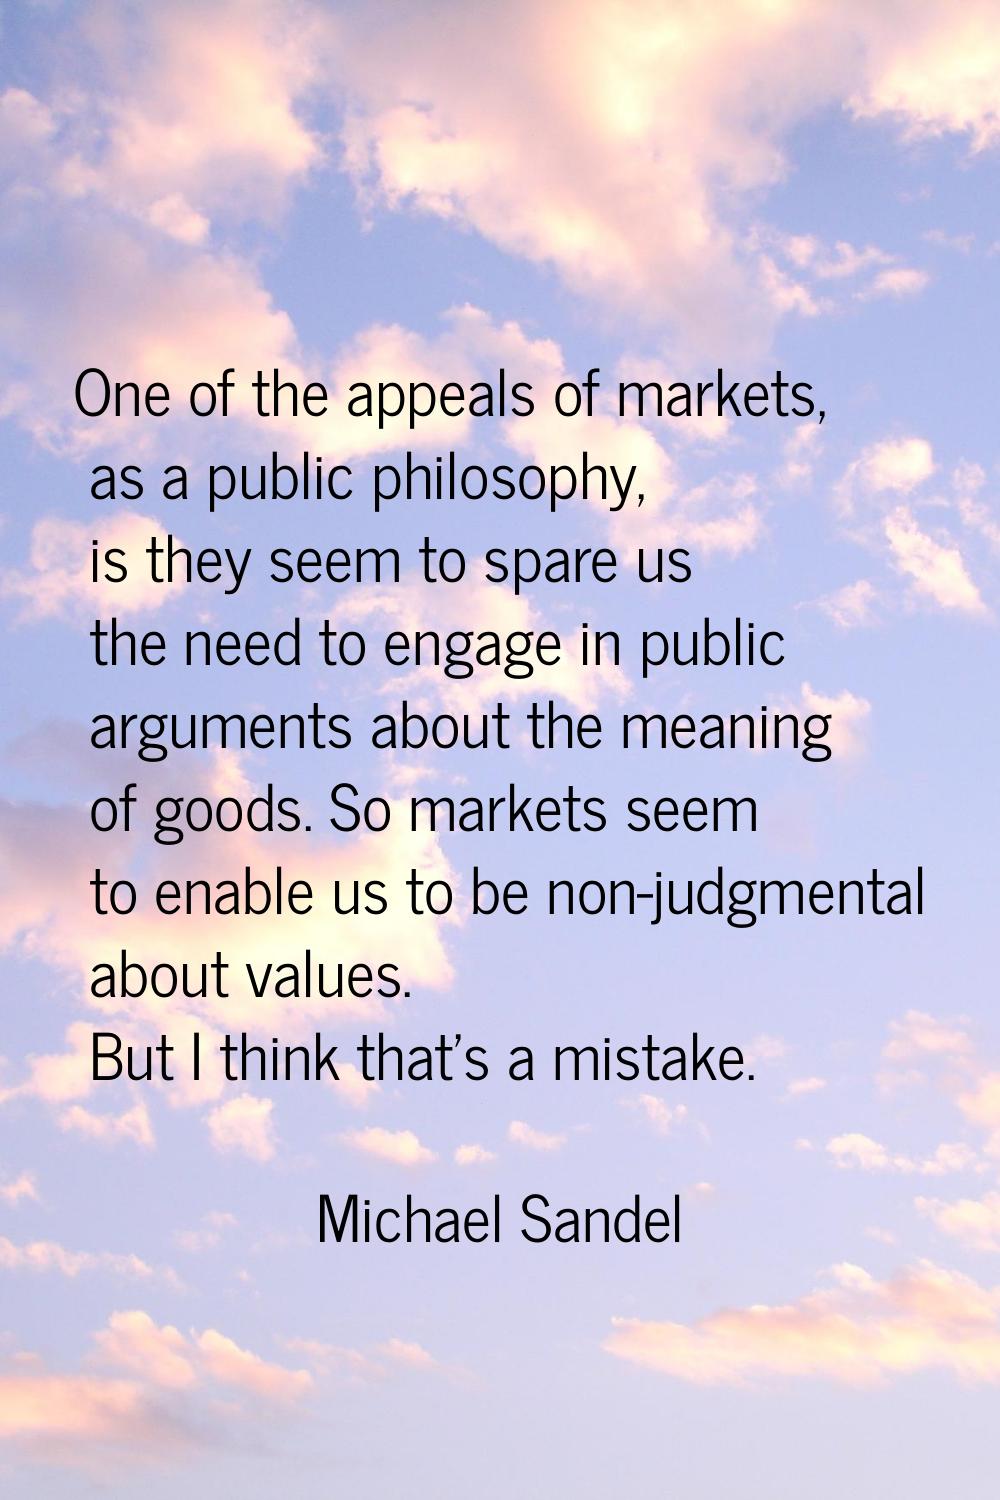 One of the appeals of markets, as a public philosophy, is they seem to spare us the need to engage 